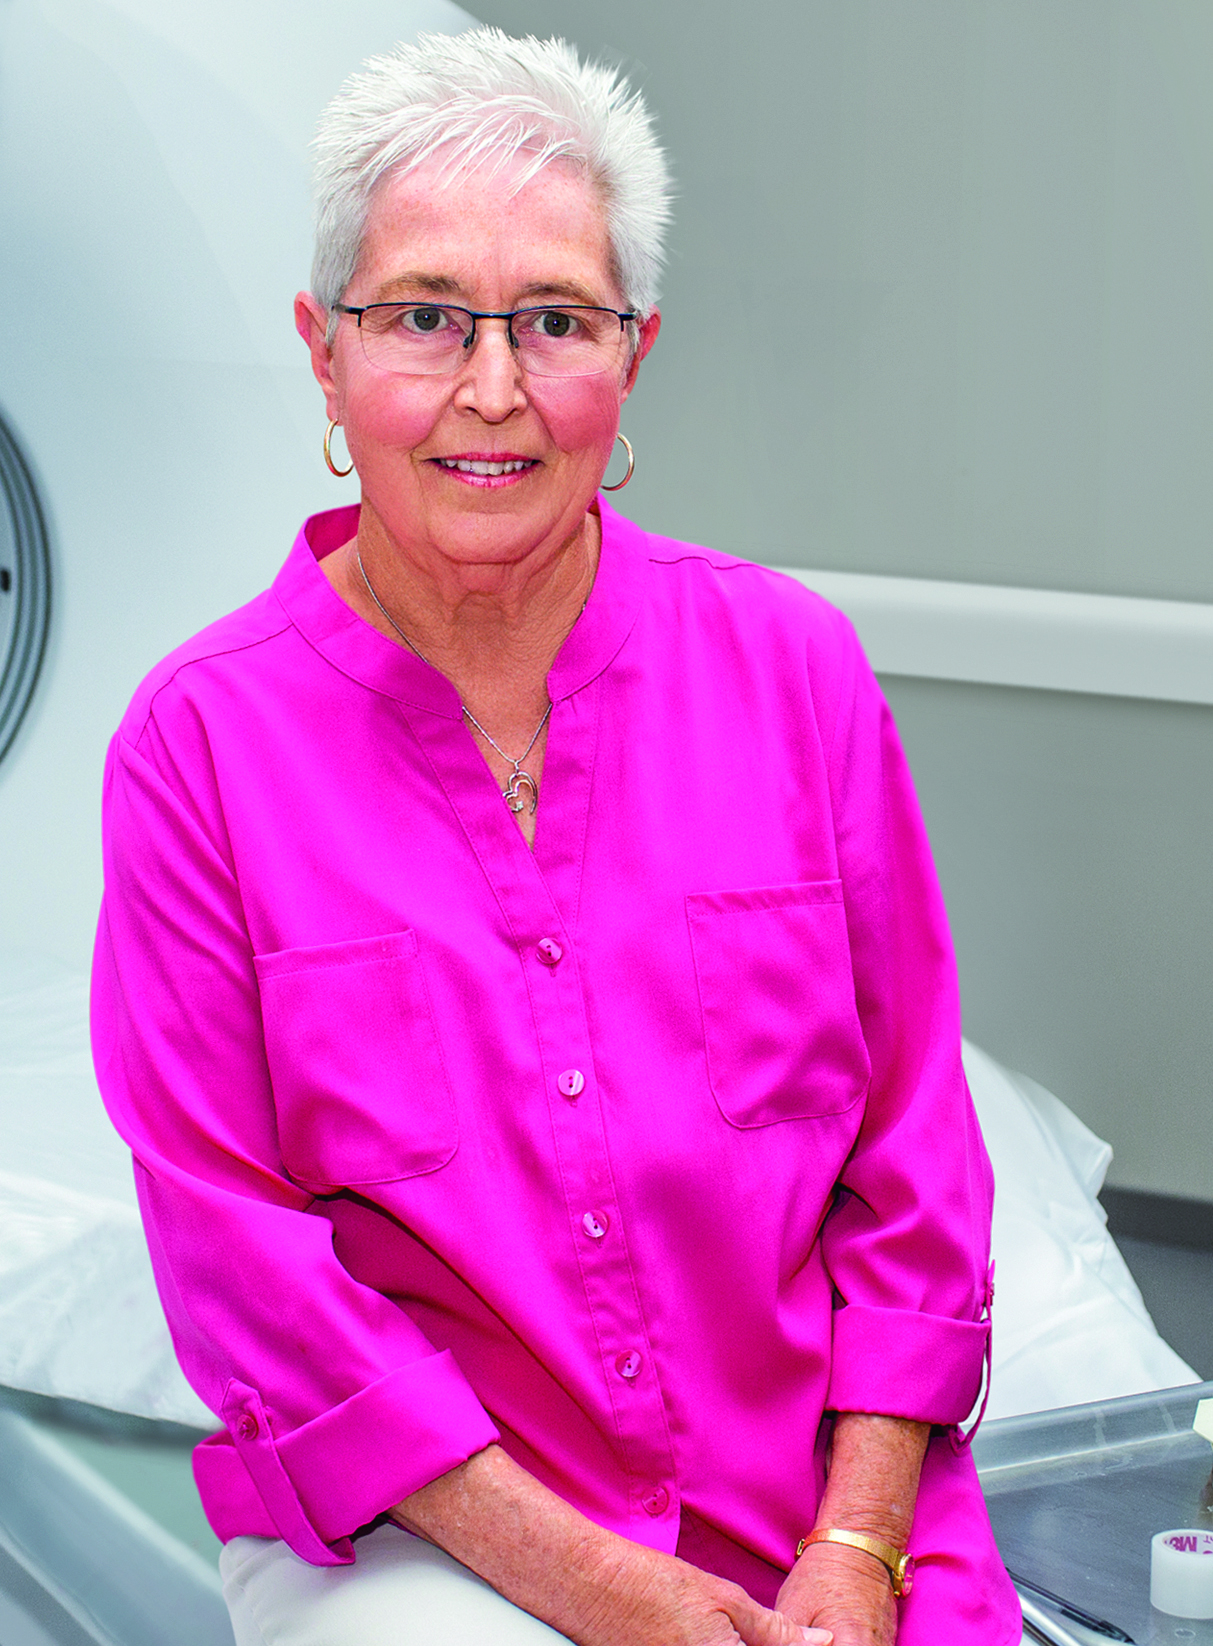 This Pittsburgh patient survived lung cancer thanks to healthcare screenings at St. Clair Hospital.